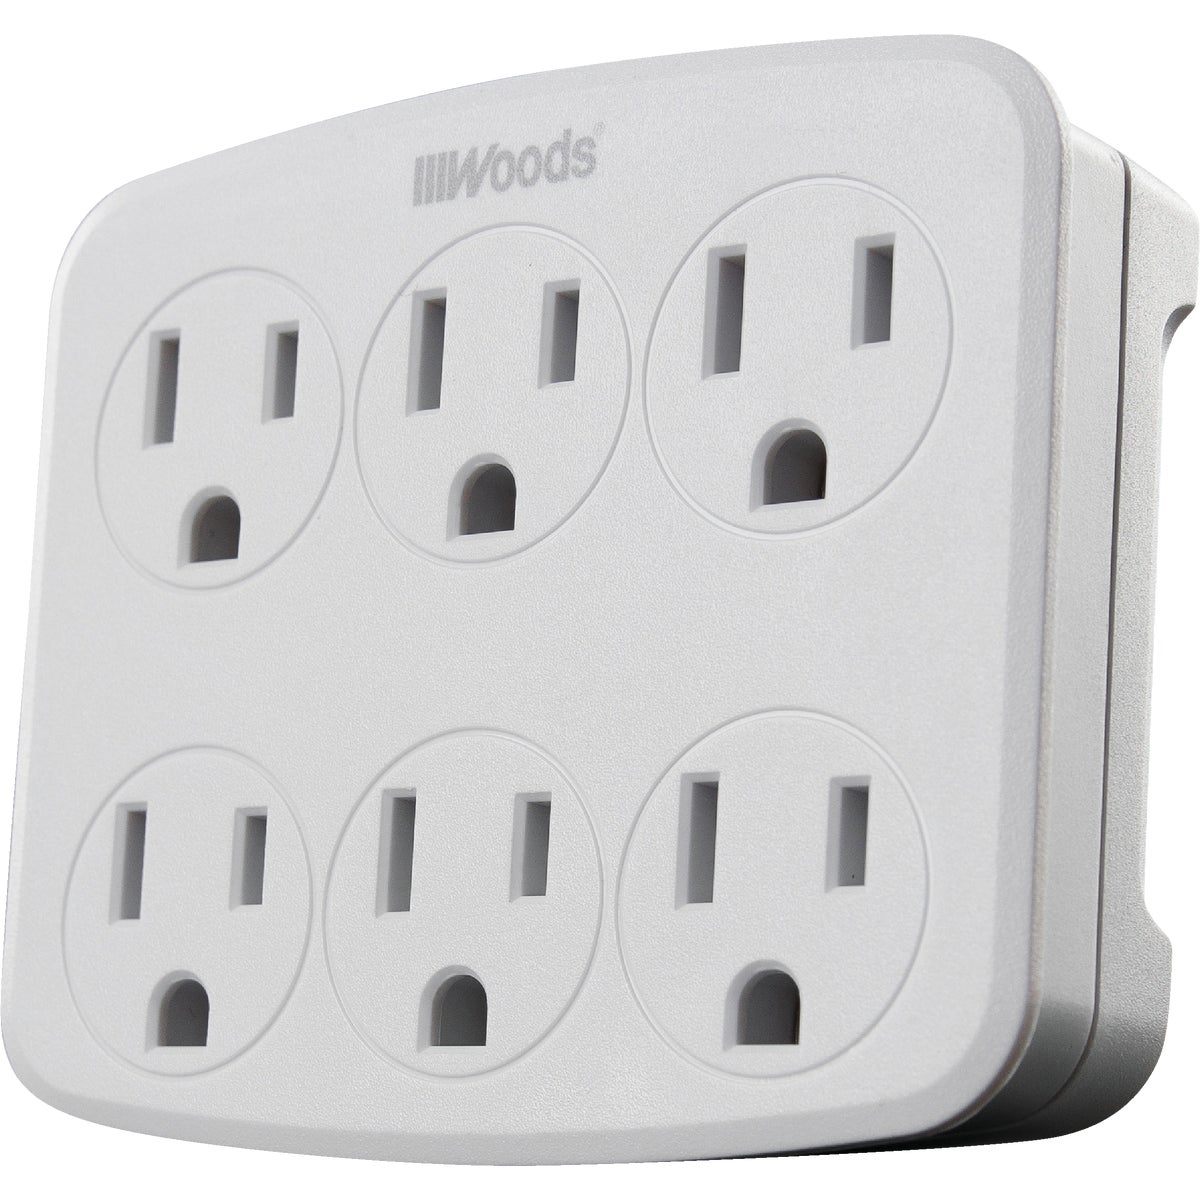 Item 502705, 6-outlet wall tap adapter.